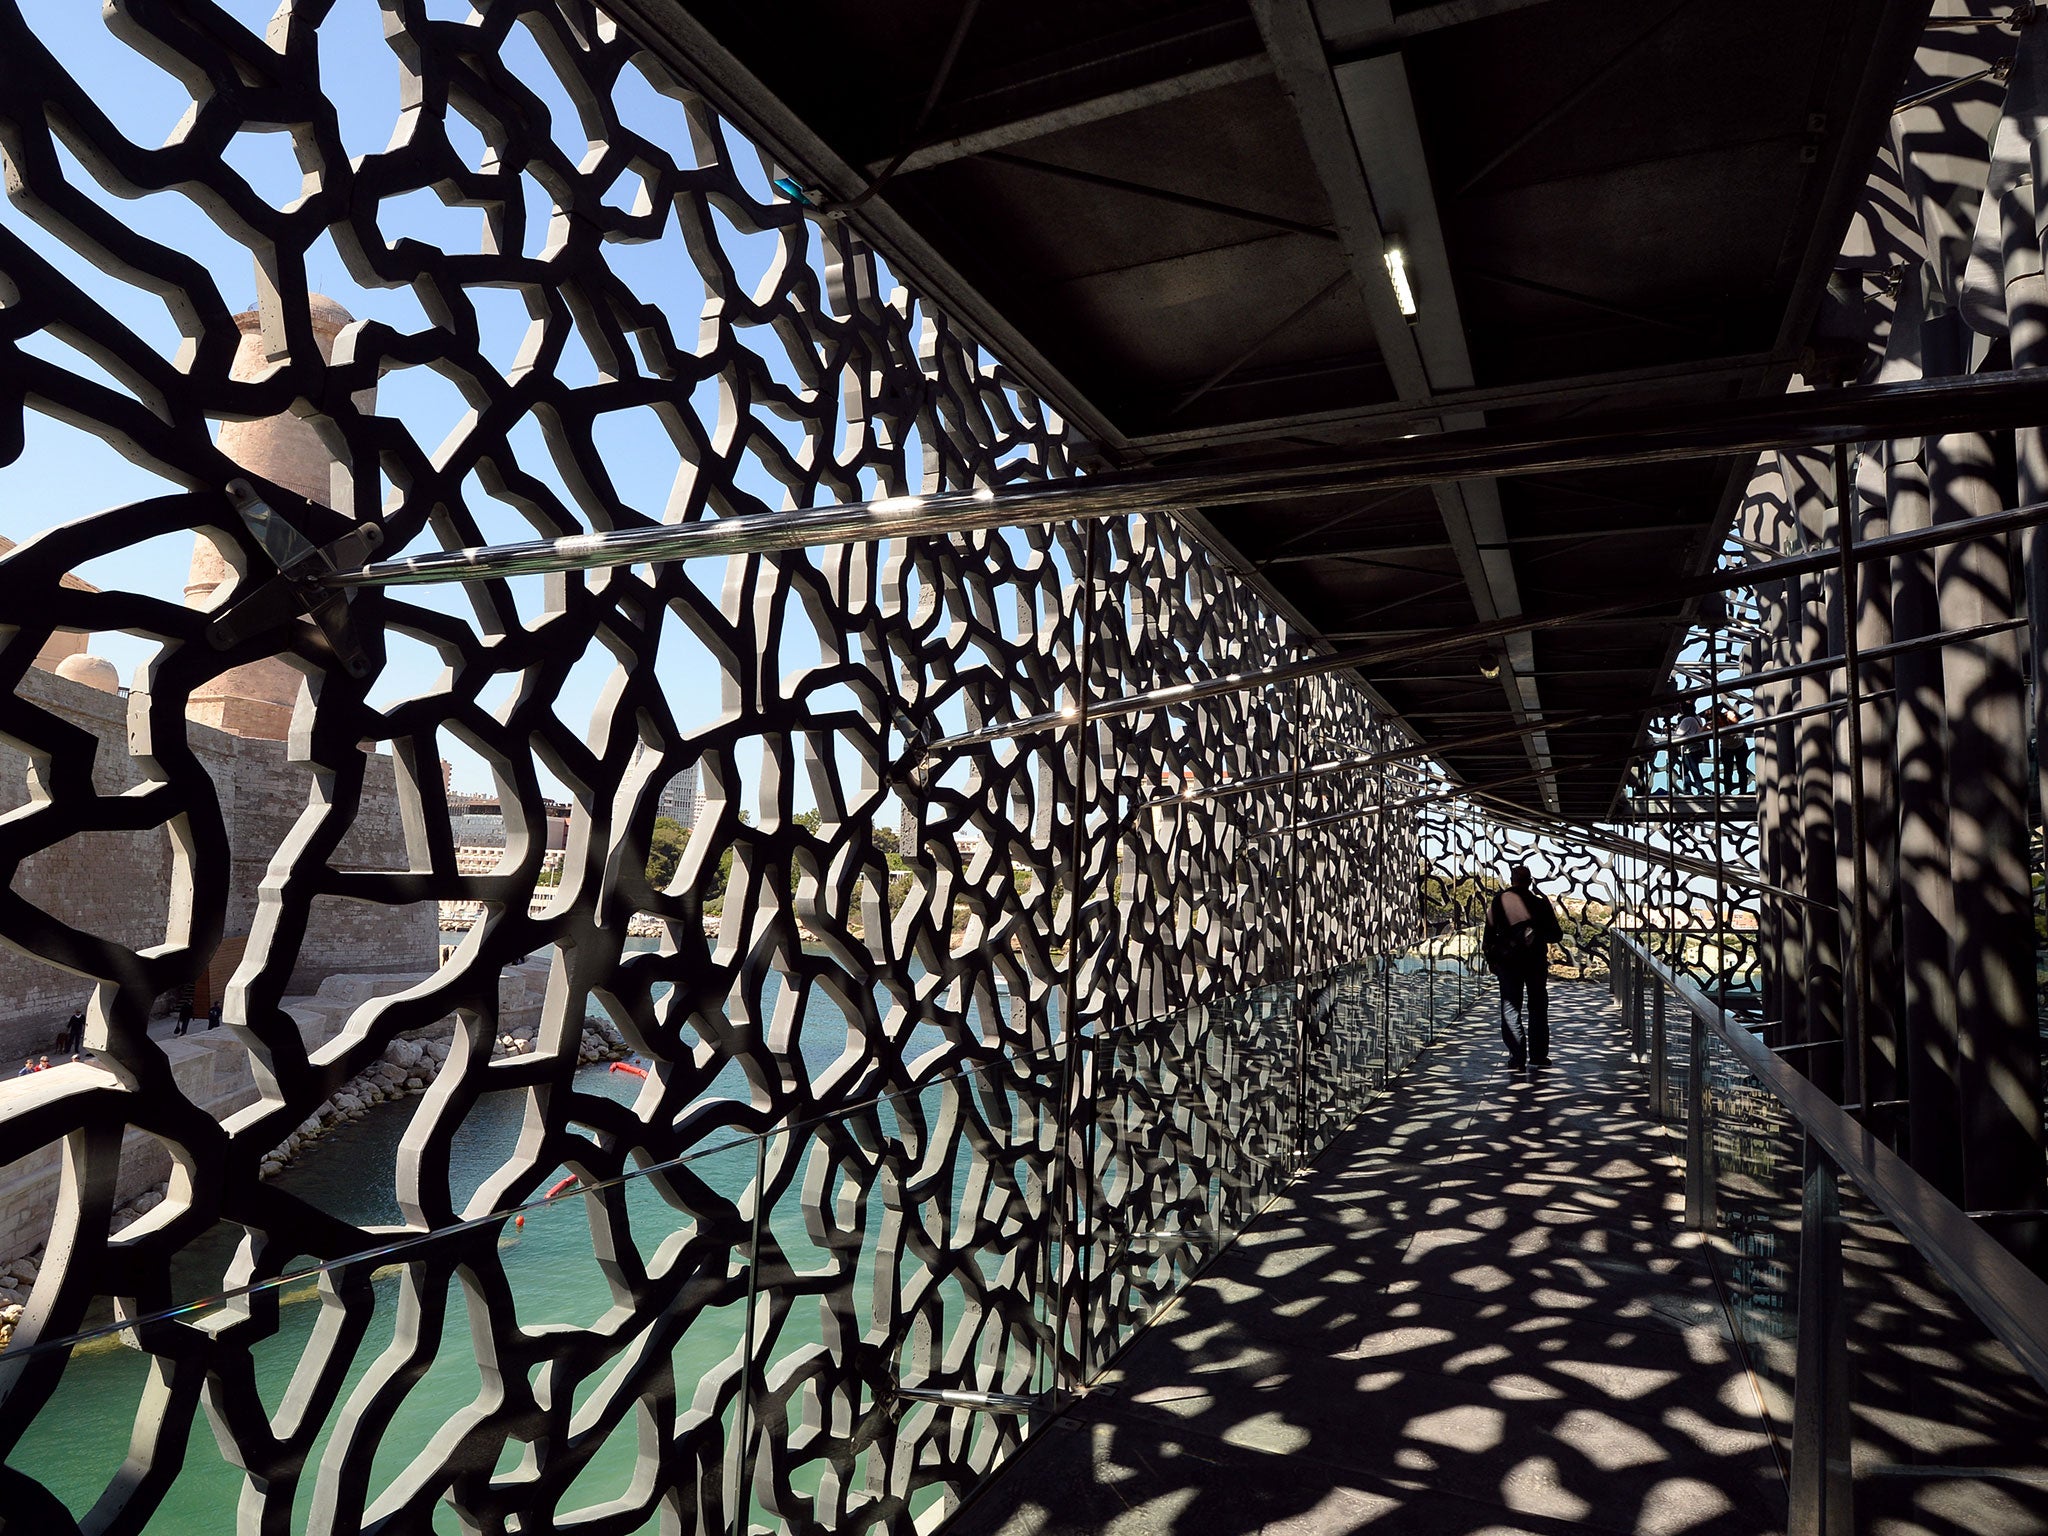 A person walks on June 3, 2013 in a passageway of the MuCEM, the Museum of Civilisations from Europe and the Mediterranean in Marseille on the eve of its opening by the French President